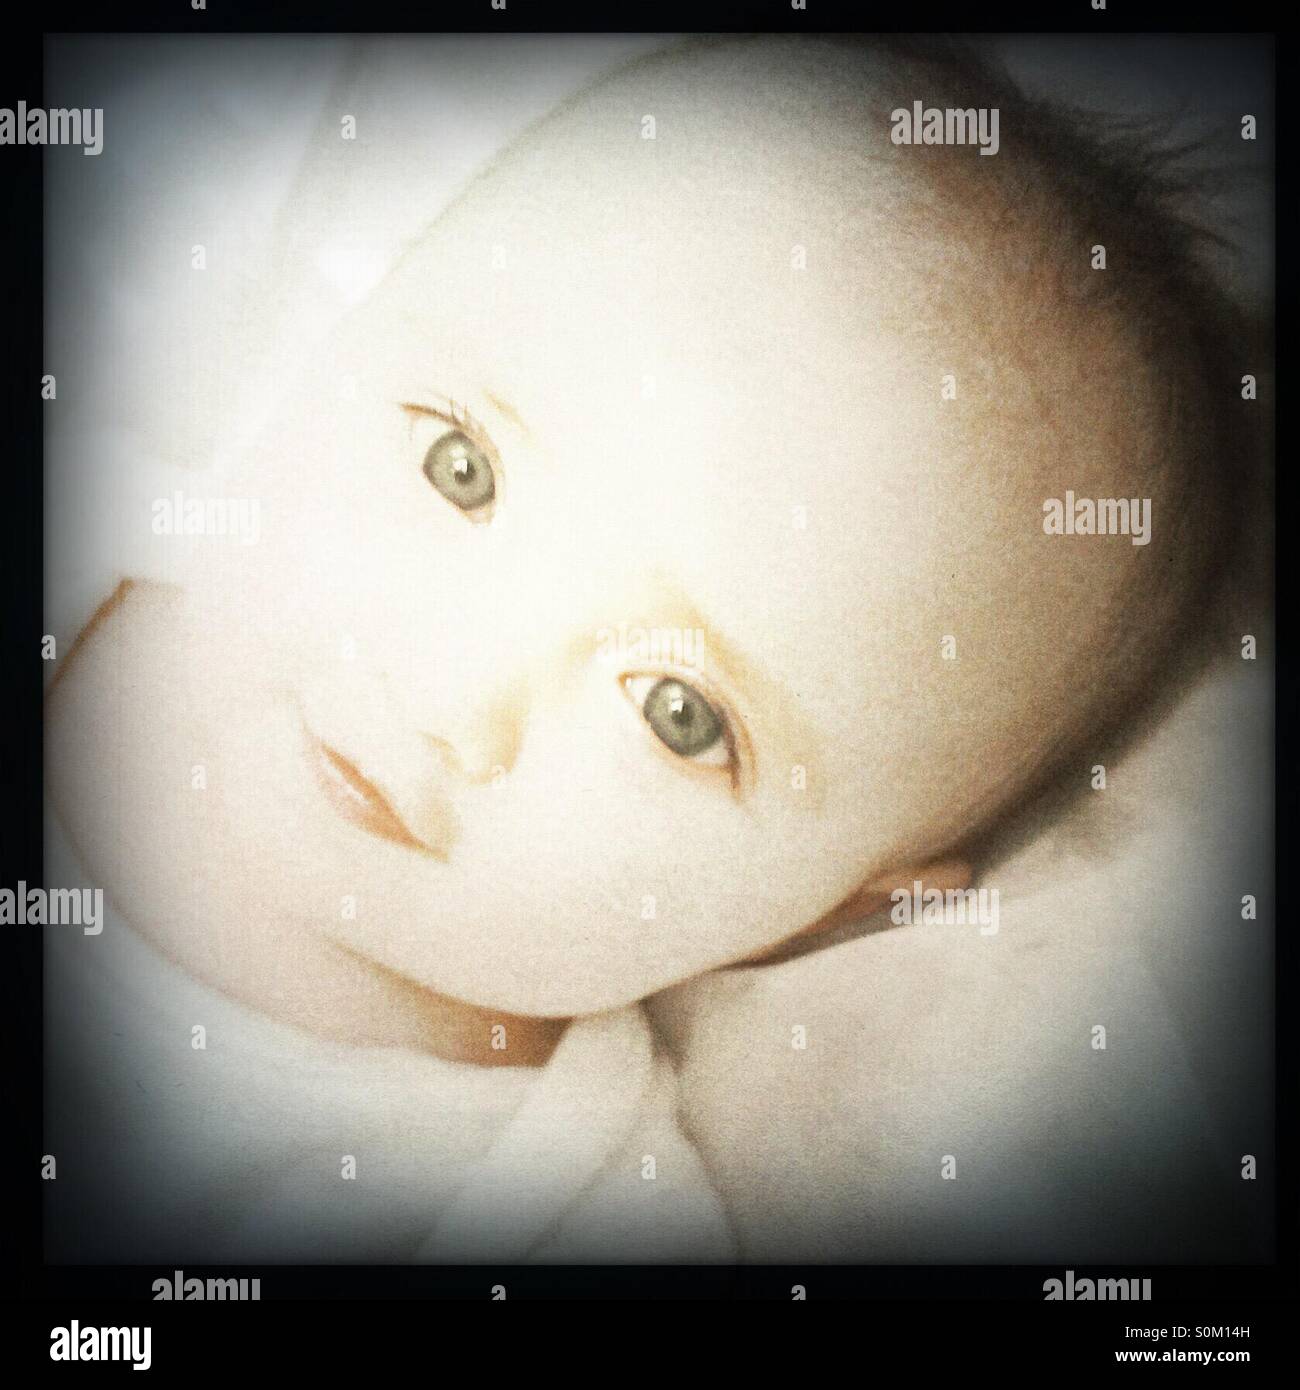 Smiling baby with big eyes Stock Photo